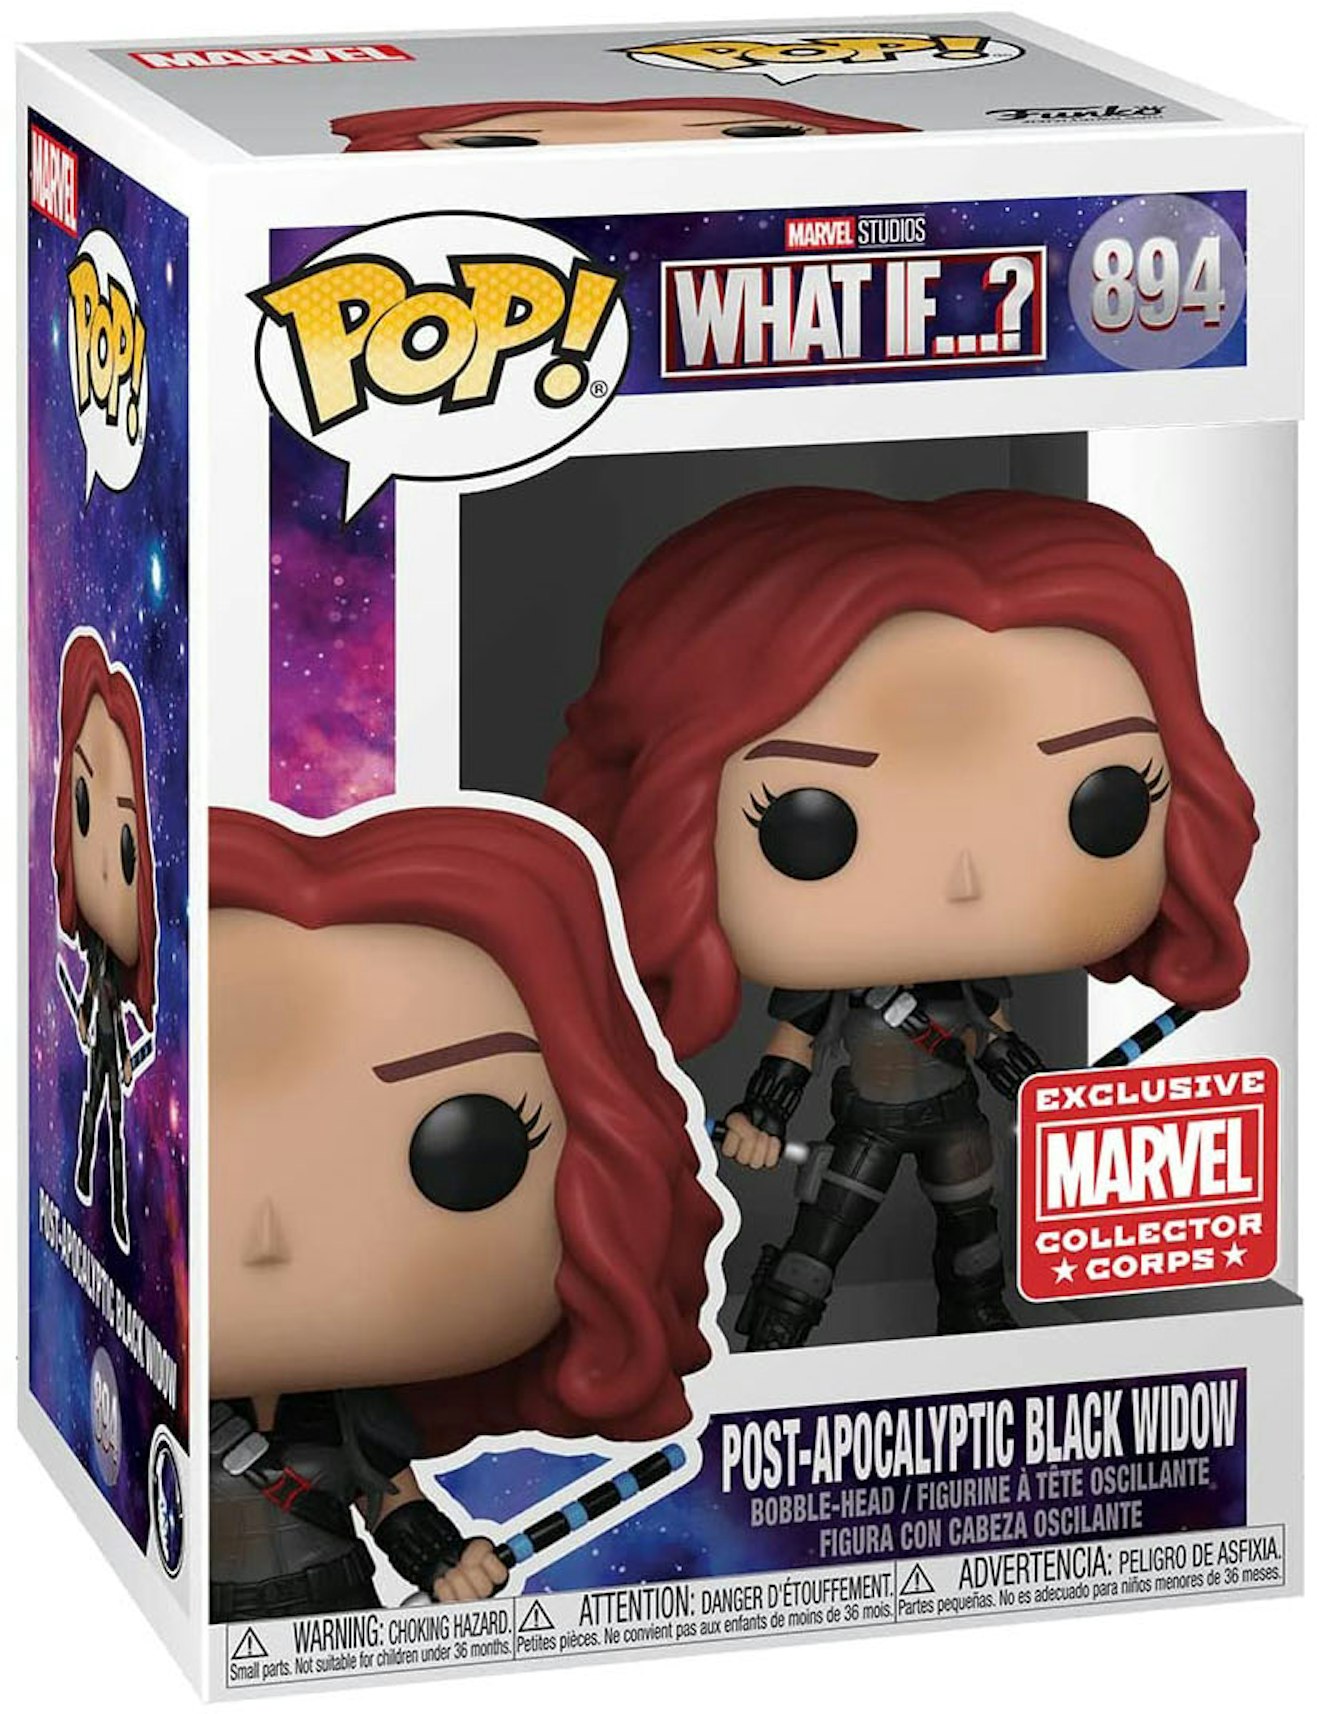 Initiativ fordrejer forklædt Funko Pop! Marvel Studios What If...? Post-Apocalyptic Black Widow  Collector Corps Exclusive Figure #894 - US